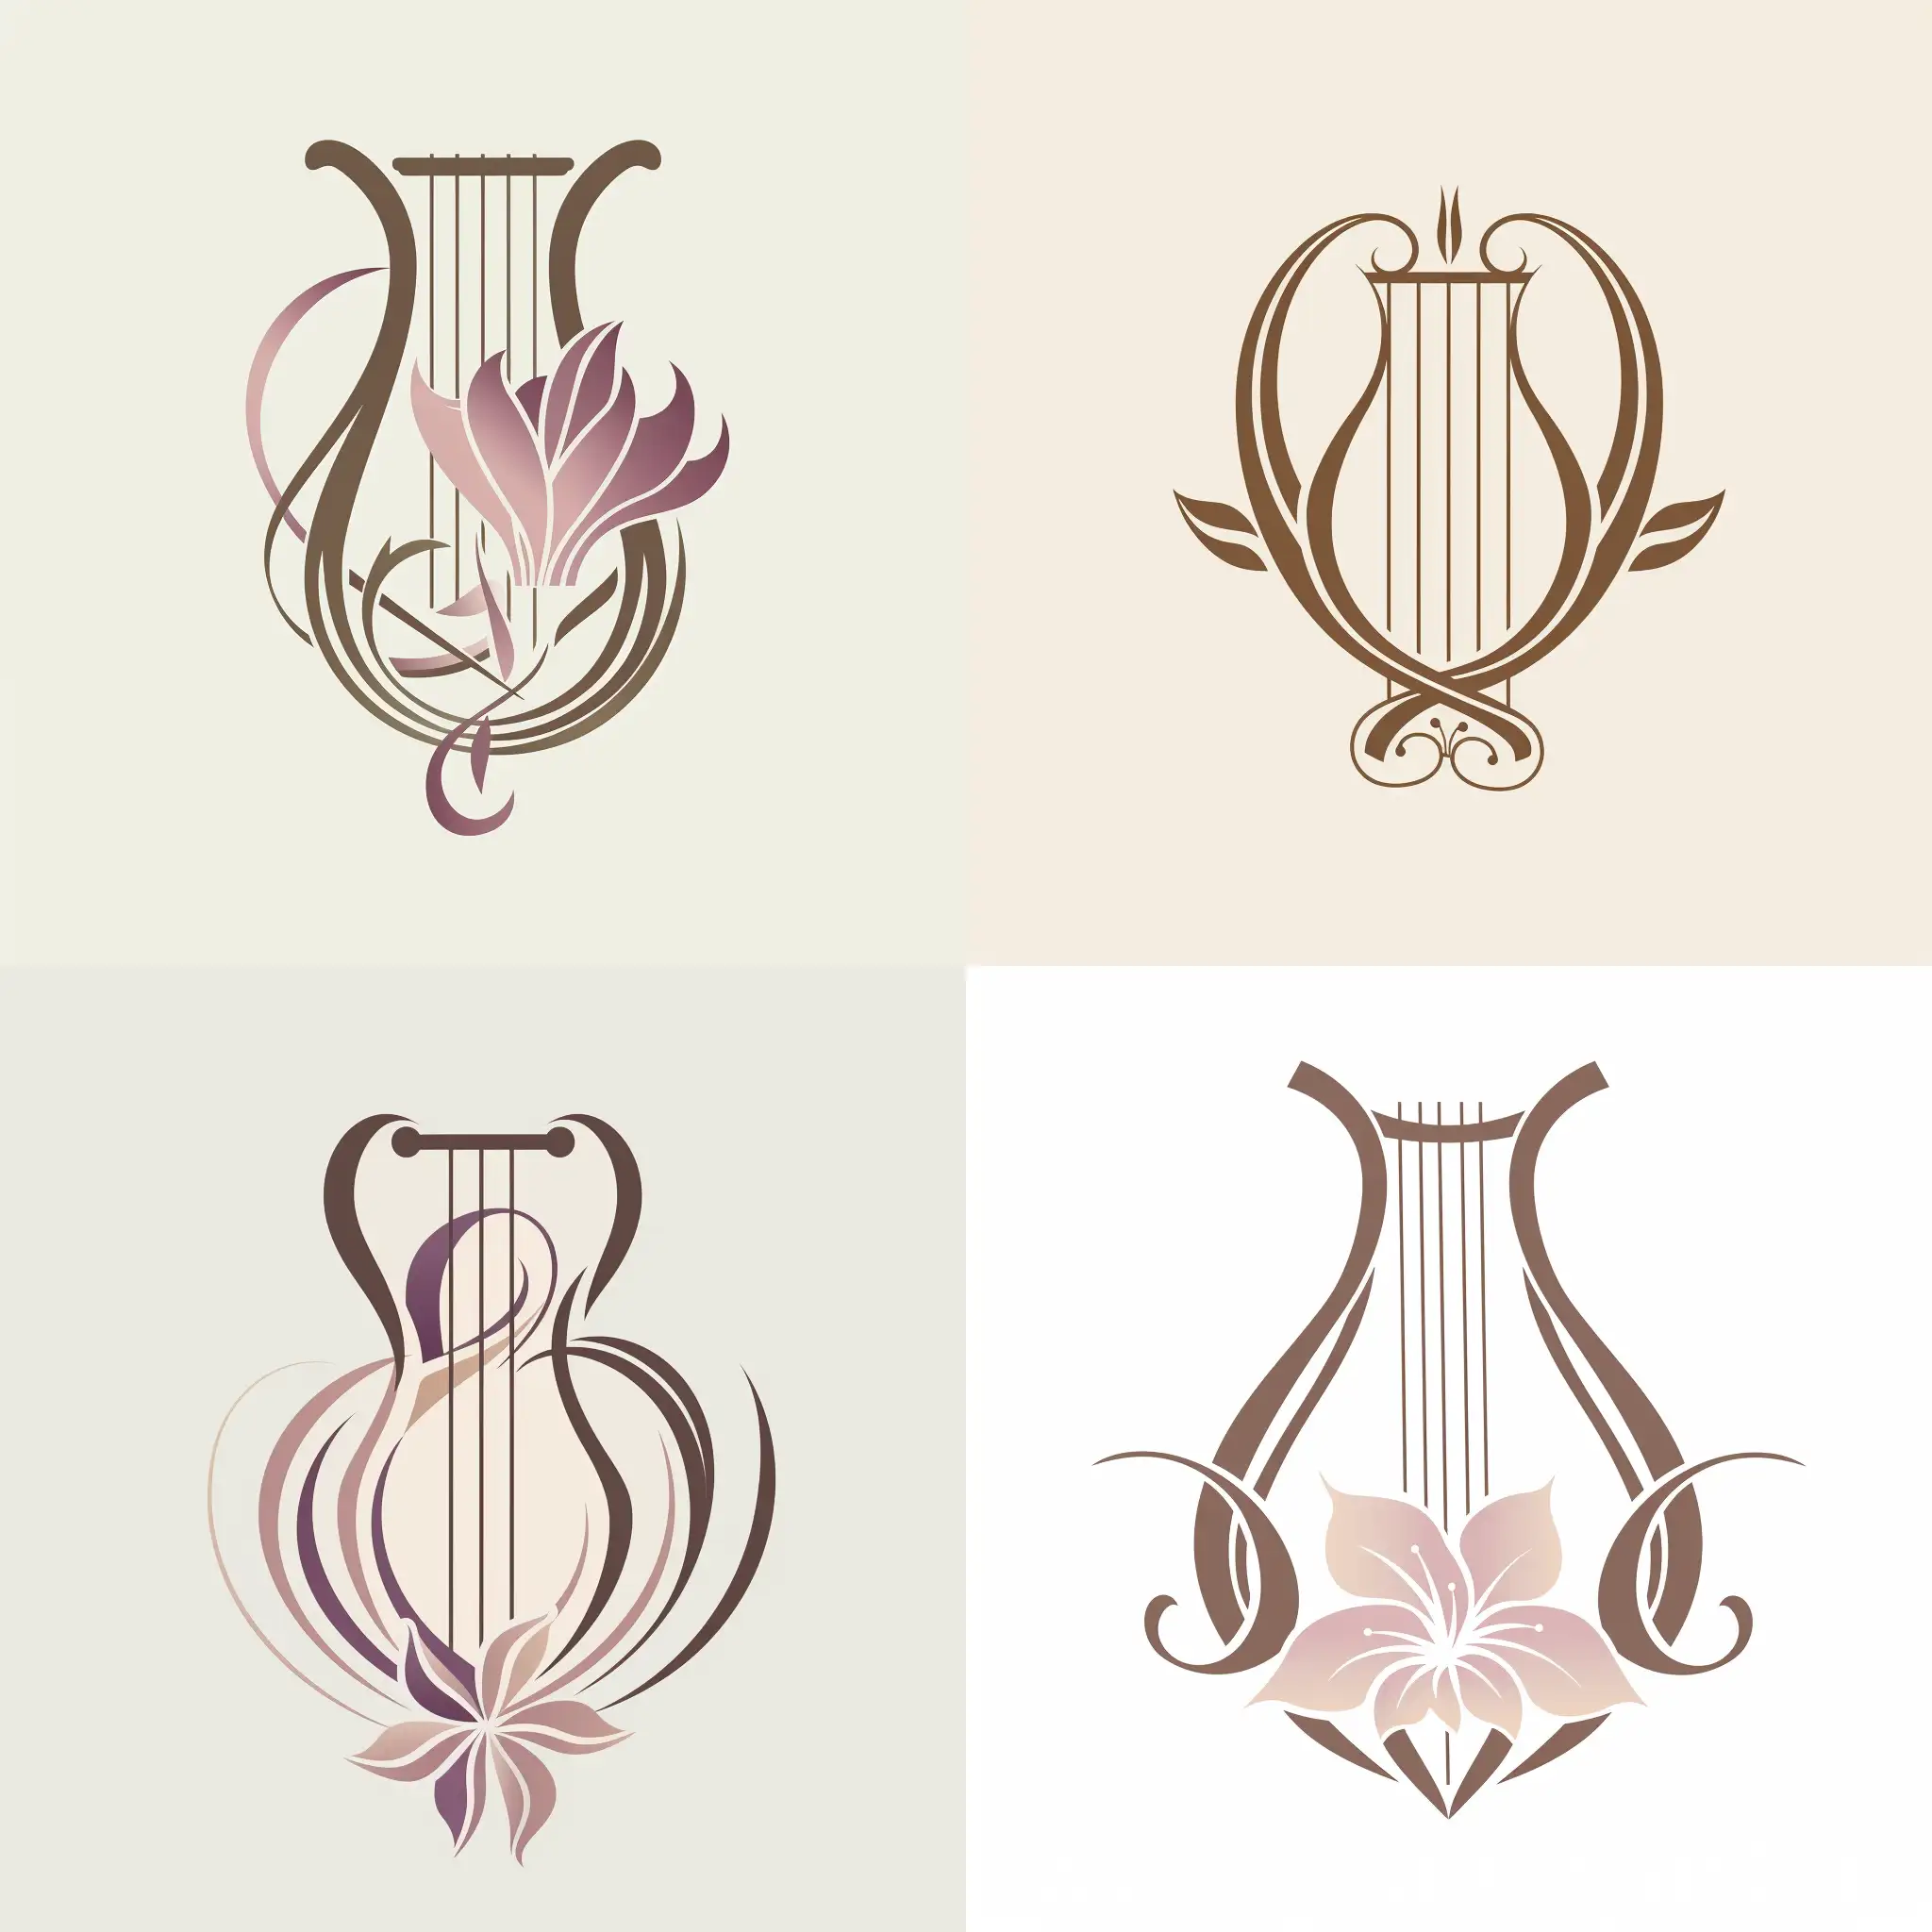 The logo features a lyre, a symbol often associated with classical music and poetry, crafted with sleek and elegant lines that convey a sense of sophistication and refinement. The lyre's graceful curves and strings are depicted with precision, suggesting both artistry and craftsmanship.

Intertwined with the lyre is a stylized flower, symbolizing beauty, creativity, and growth. The petals of the flower bloom delicately around the lyre's frame, adding a touch of natural elegance to the design. The flower can be rendered in a contrasting color to the lyre, perhaps in shades of soft pink, lilac, or ivory, creating a visually striking contrast.

To enhance the sense of professionalism and quality, the logo can be set against a clean, neutral background, such as white or light gray. The typography used for any accompanying text should be refined and timeless, complementing the sophistication of the lyre and flower imagery.

Overall, the logo conveys a sense of artistic excellence and creative expression, making it ideal for businesses or organizations involved in music, poetry, or the arts.